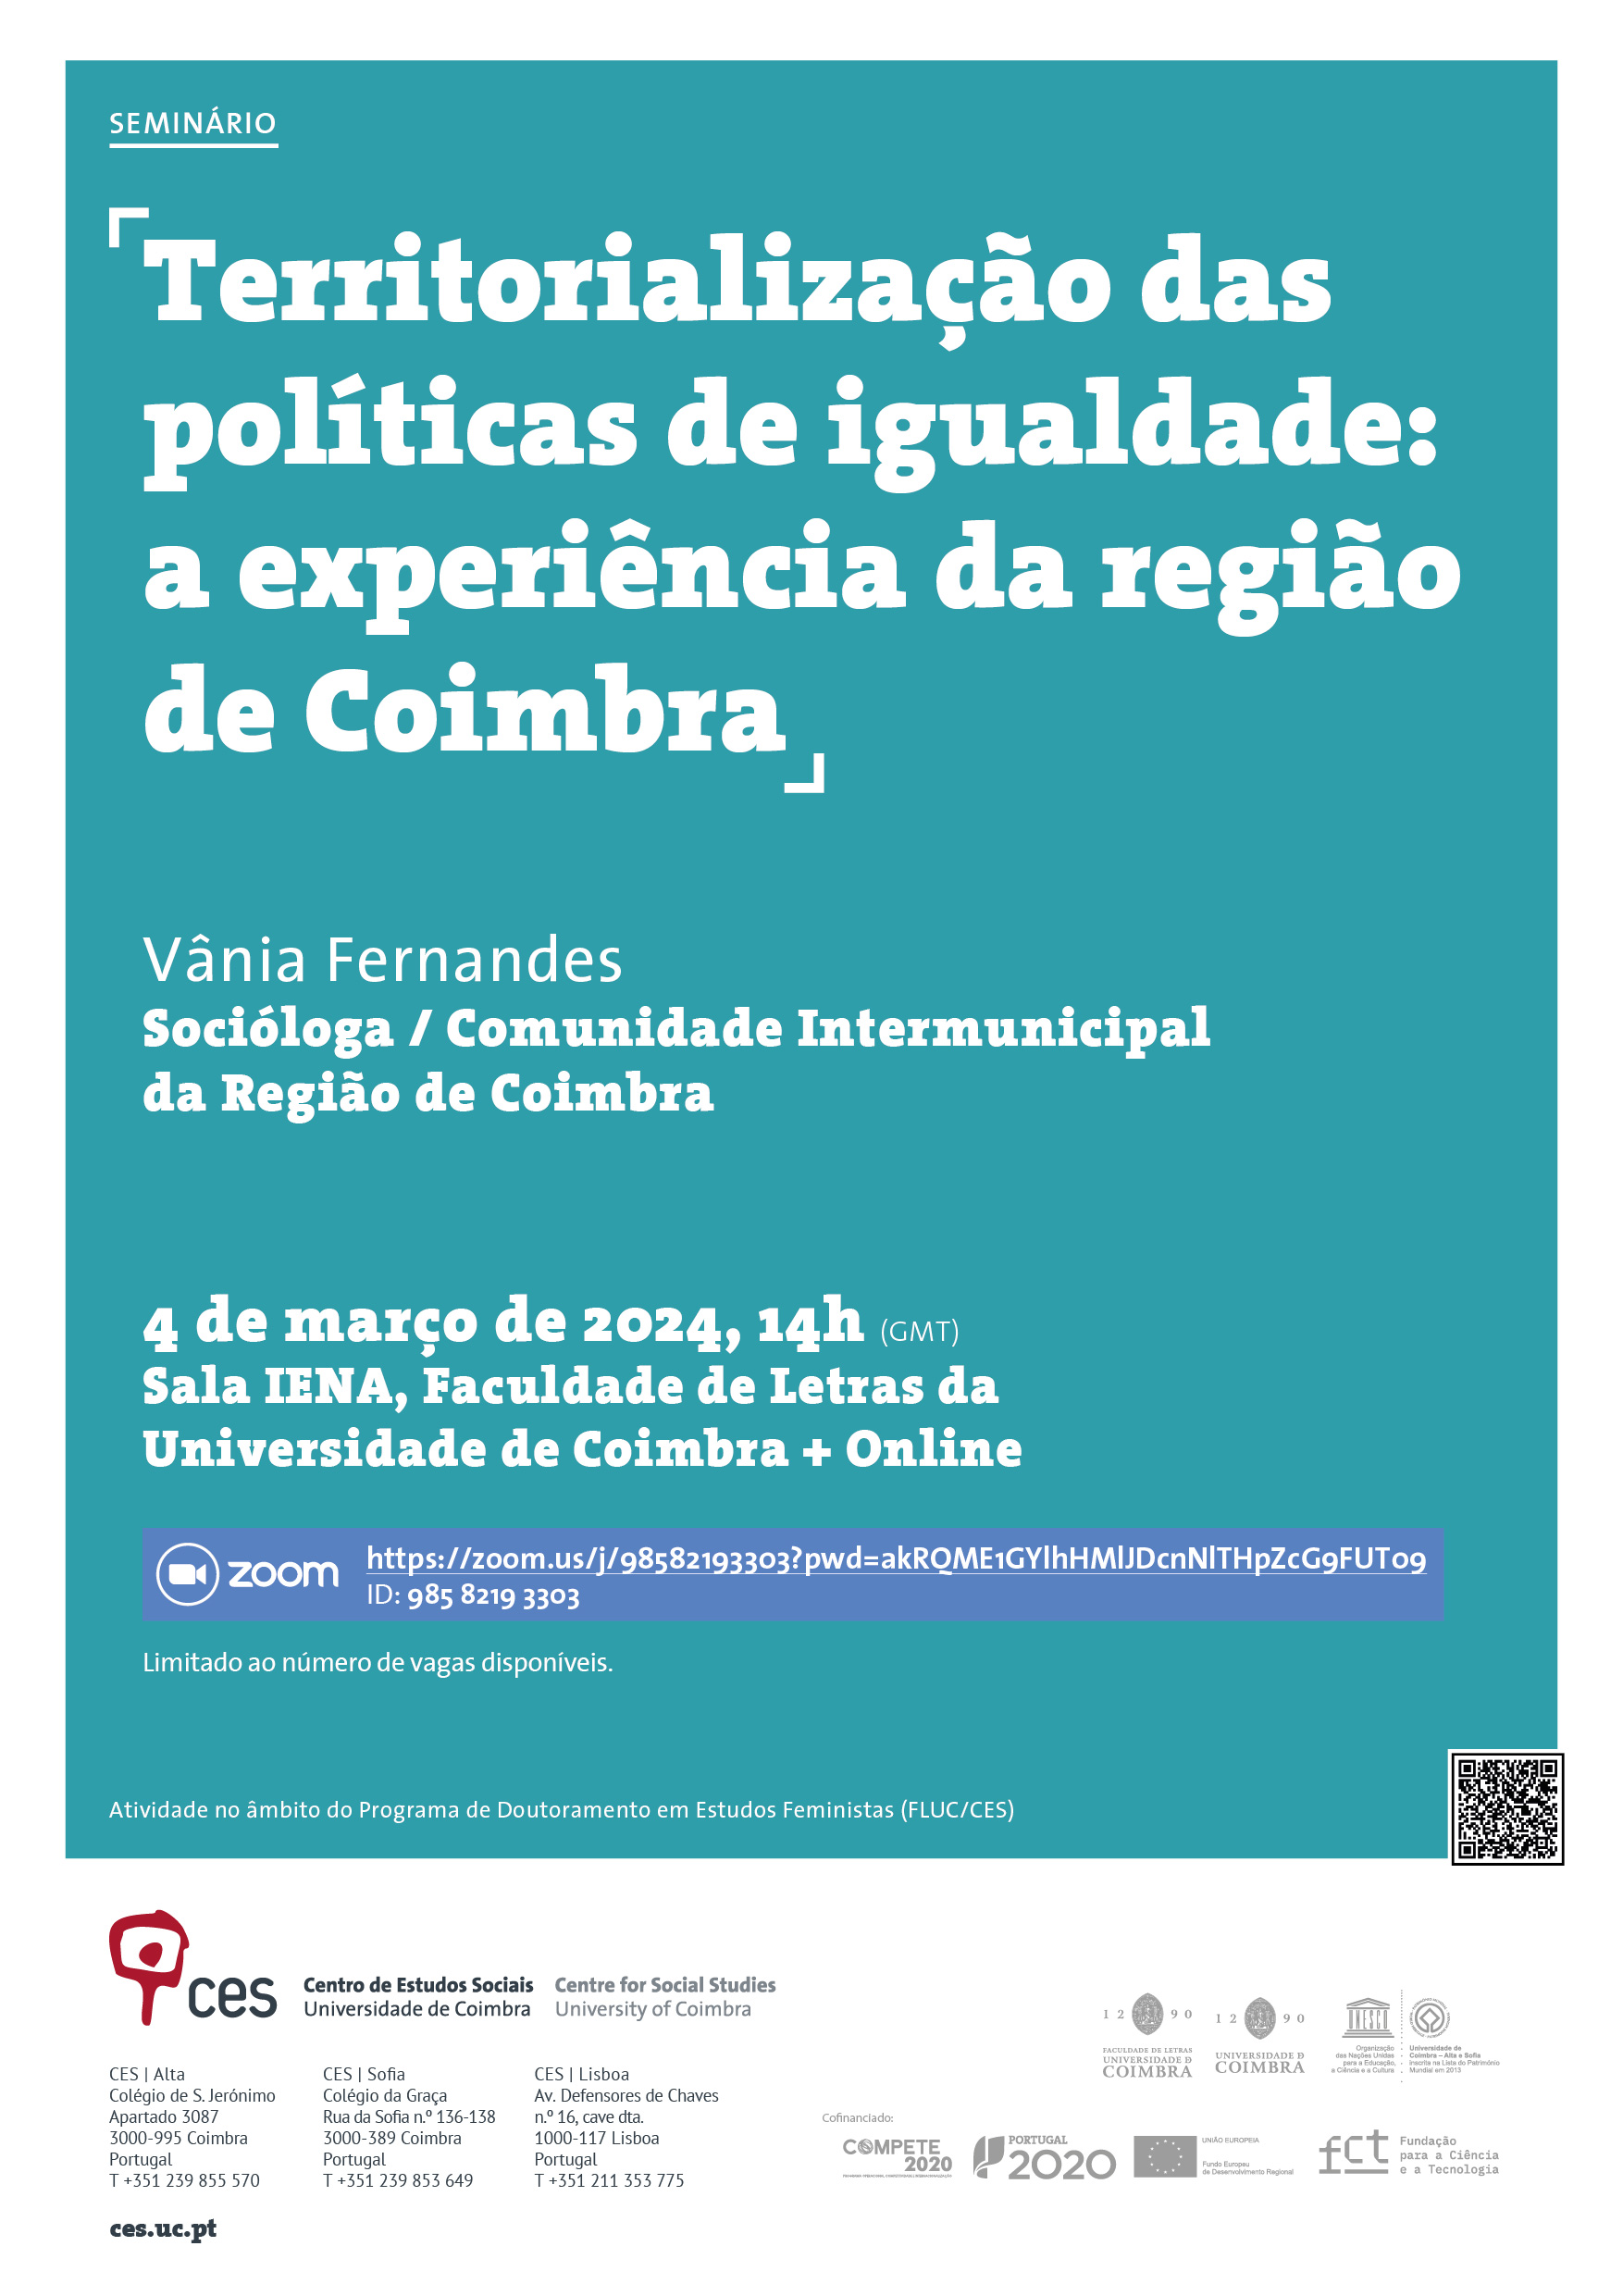 Territorialisation of equality policies: the experience of the Coimbra region <span id="edit_45289"><script>$(function() { $('#edit_45289').load( "/myces/user/editobj.php?tipo=evento&id=45289" ); });</script></span>